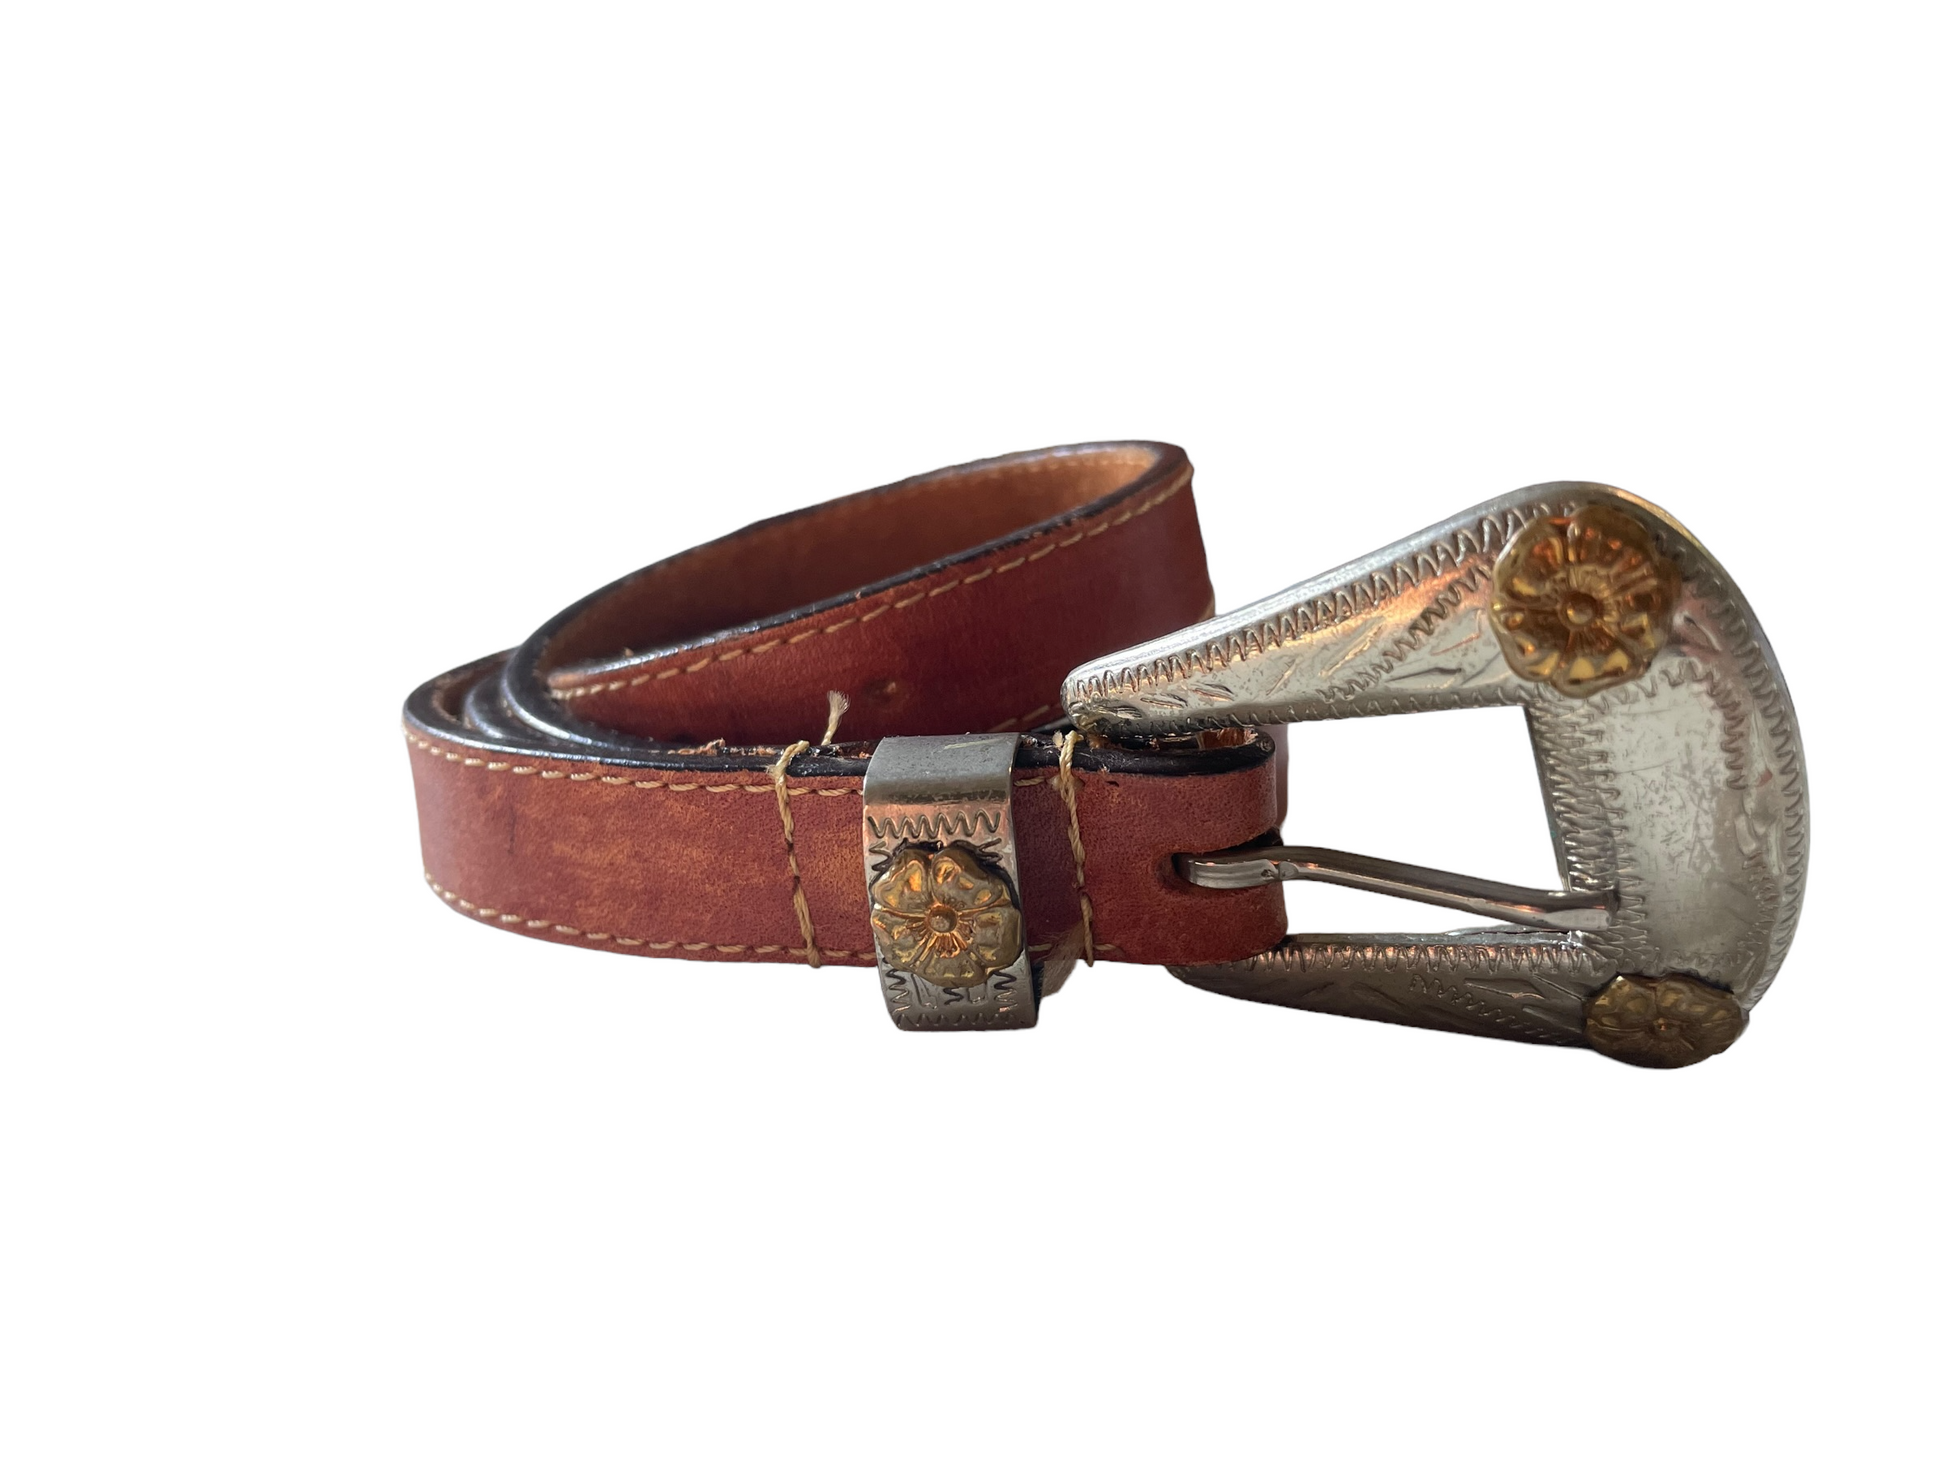 Vintage Leather Belt with Western Buckle View of rolled belt with buckle.